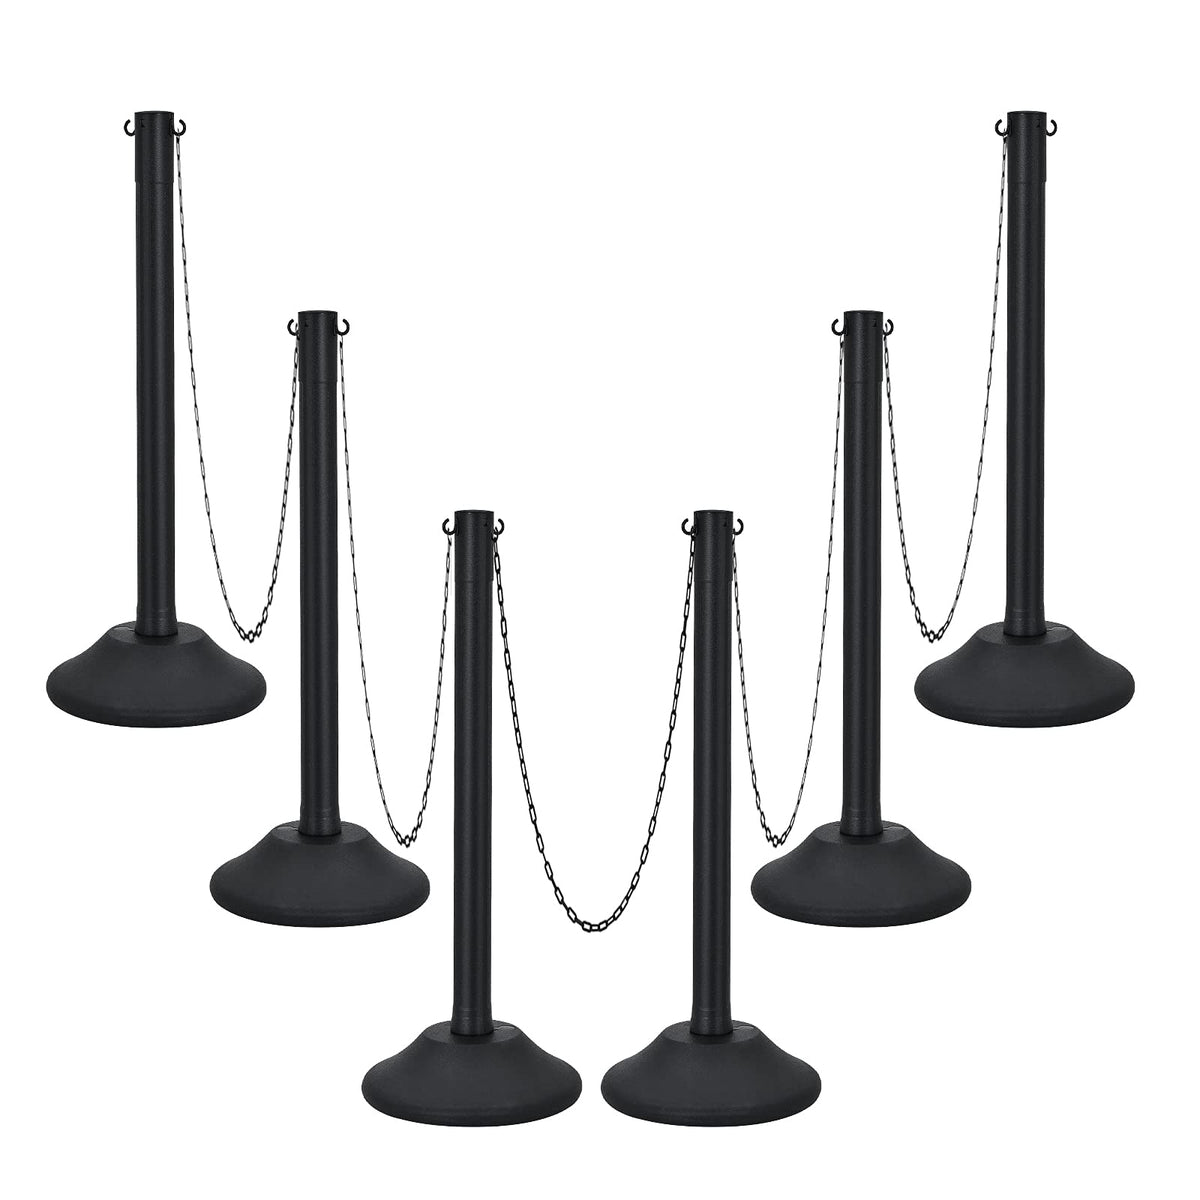 6PCS Plastic Stanchion Set, Crowd Control Safety Barriers with 60" Link Chain - GoplusUS